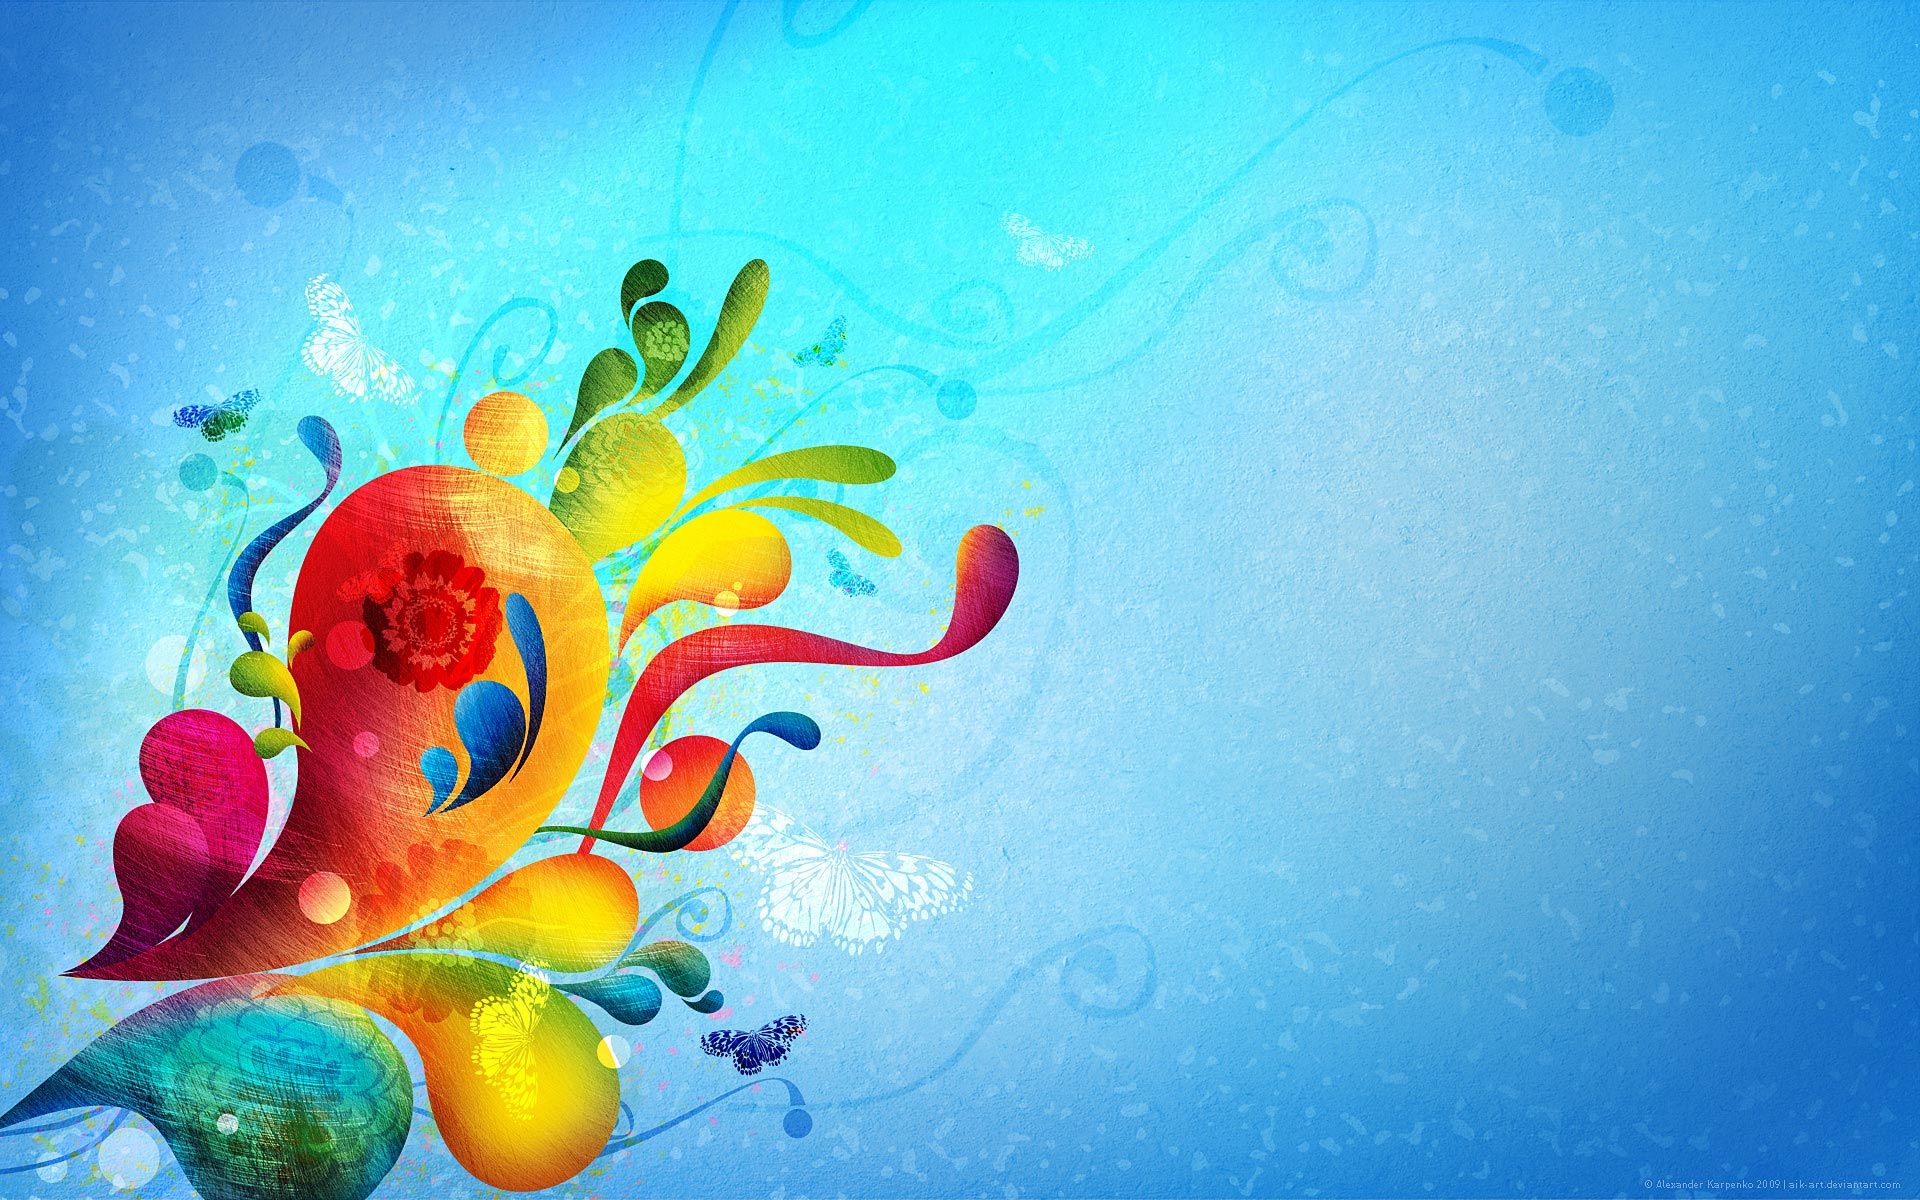 Art, colors, butterfly, beautiful, freewallpapers, wallpapers